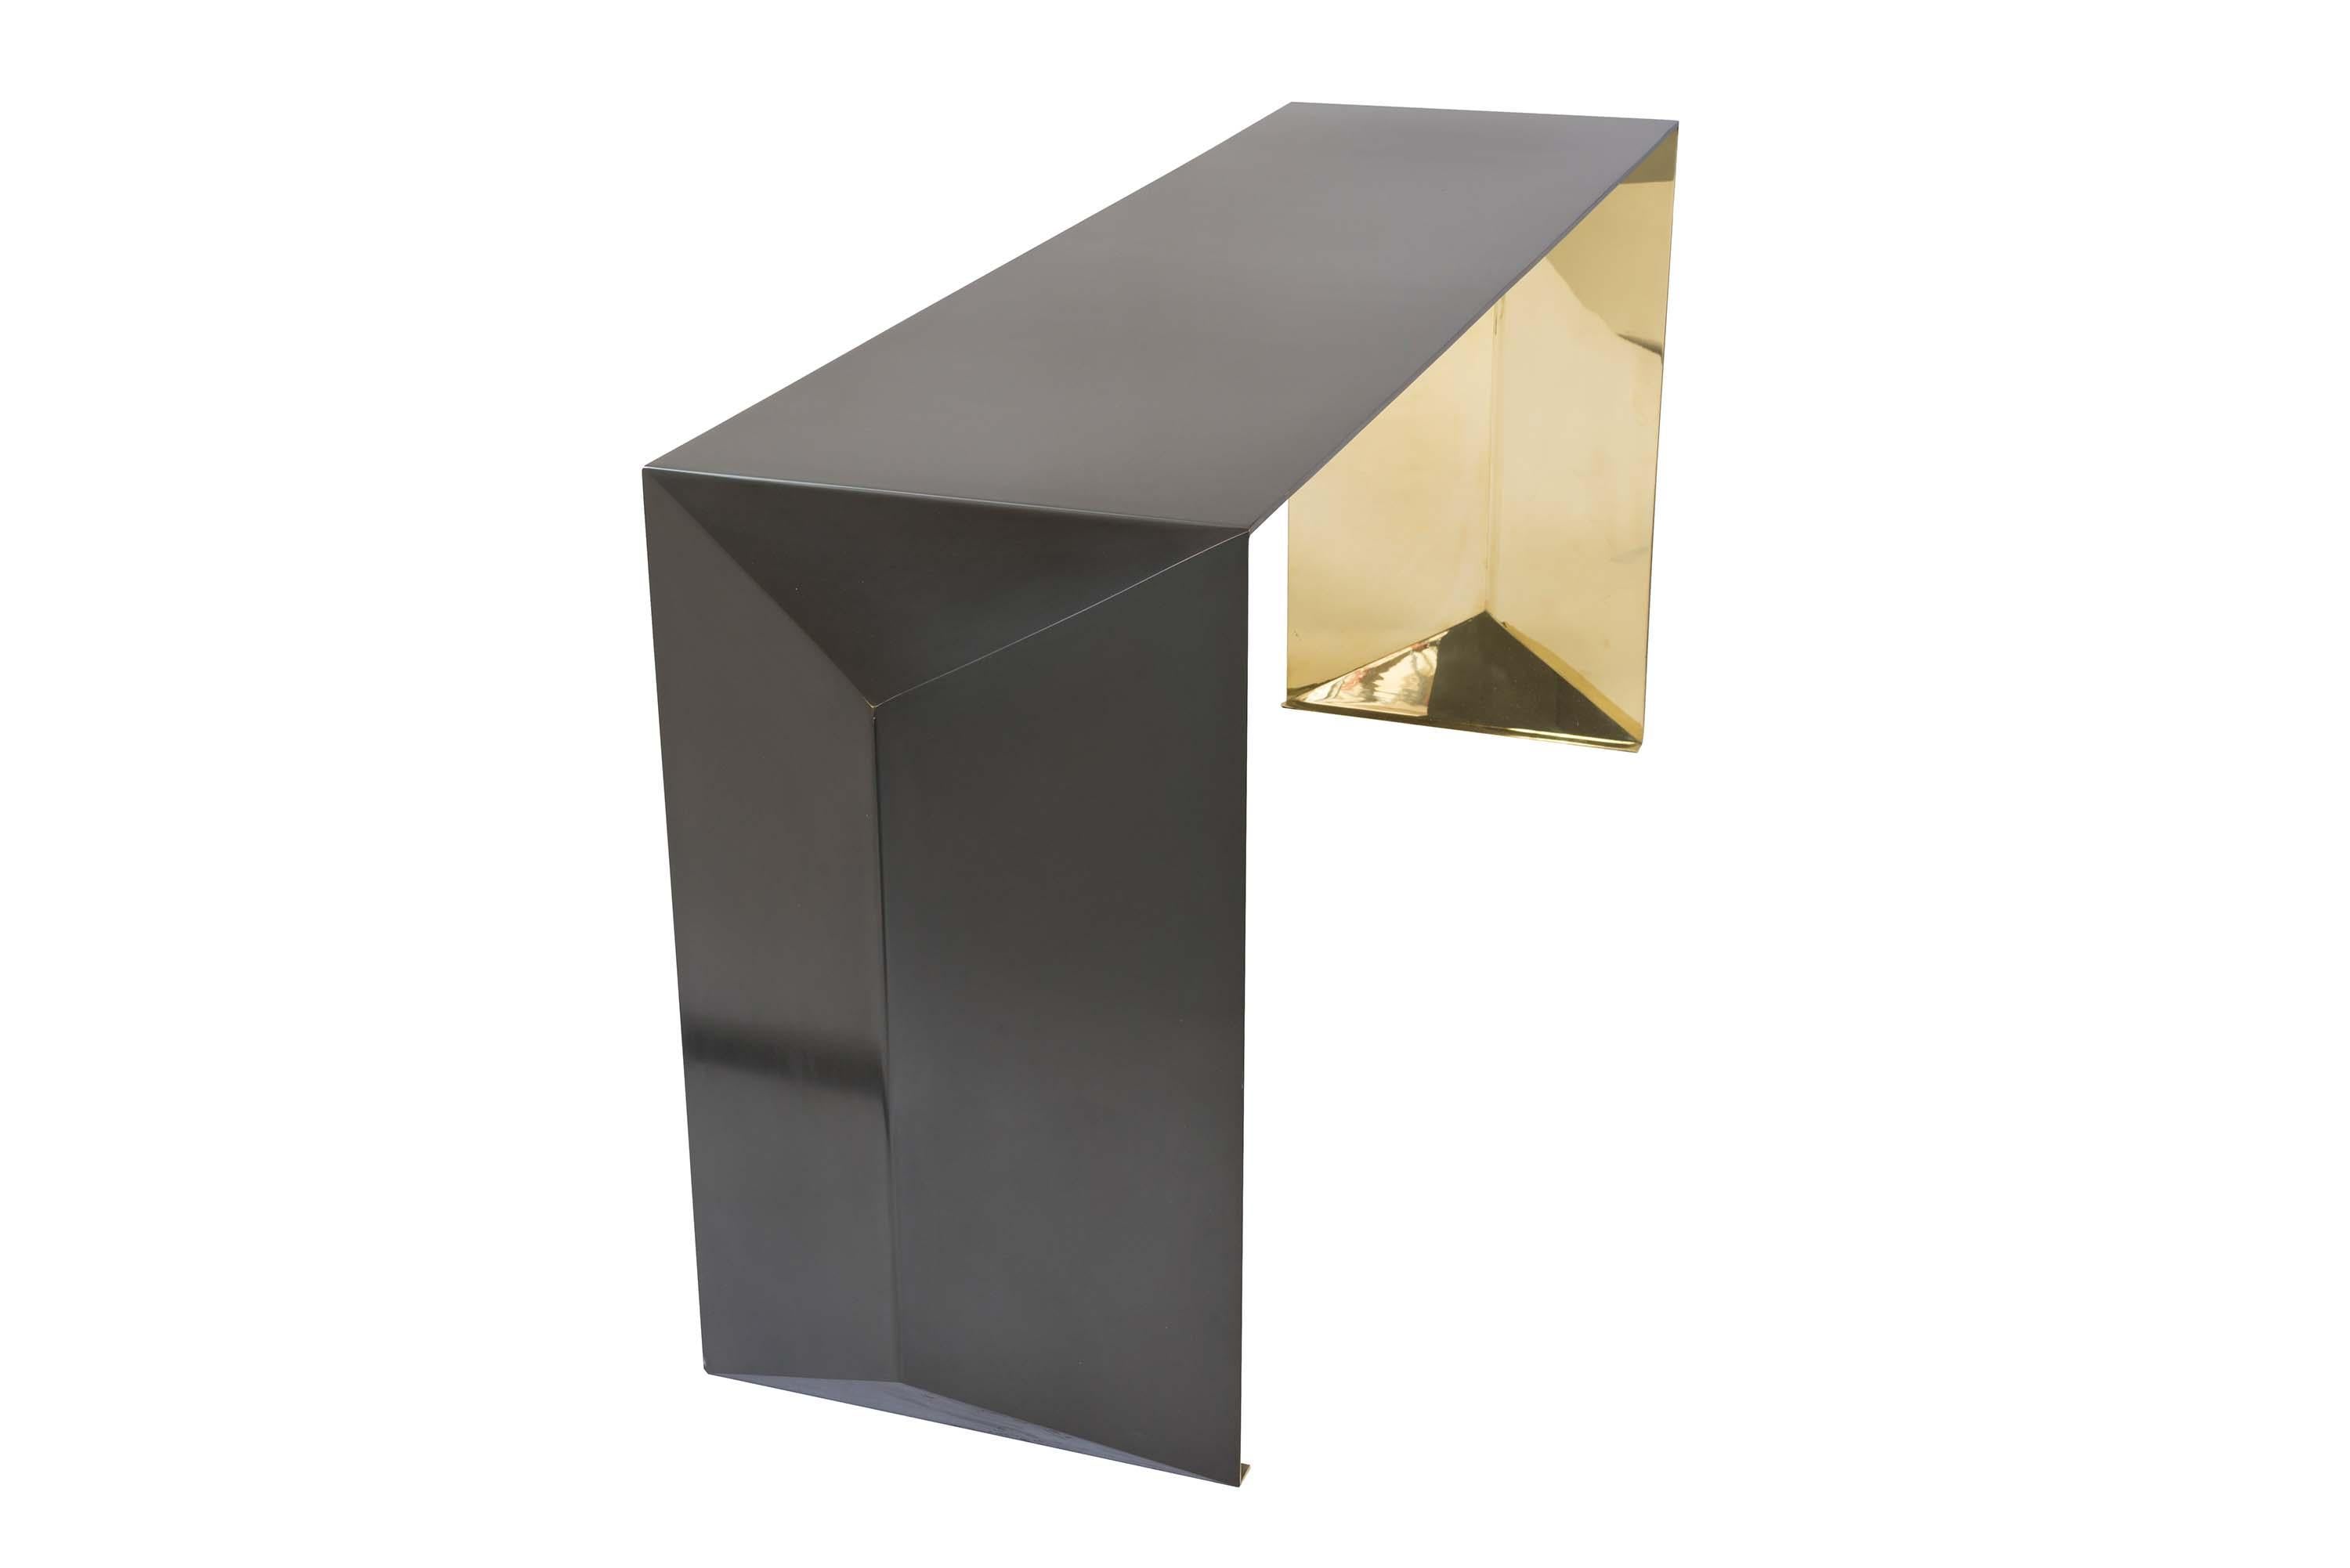 Metal console table in a hand rubbed patina finish on exterior and a mirror polished finish on interior. Marine-grade finish available at an upcharge. Inspired by folding paper and realized in sheet metal, this table's shape has a bold geometric